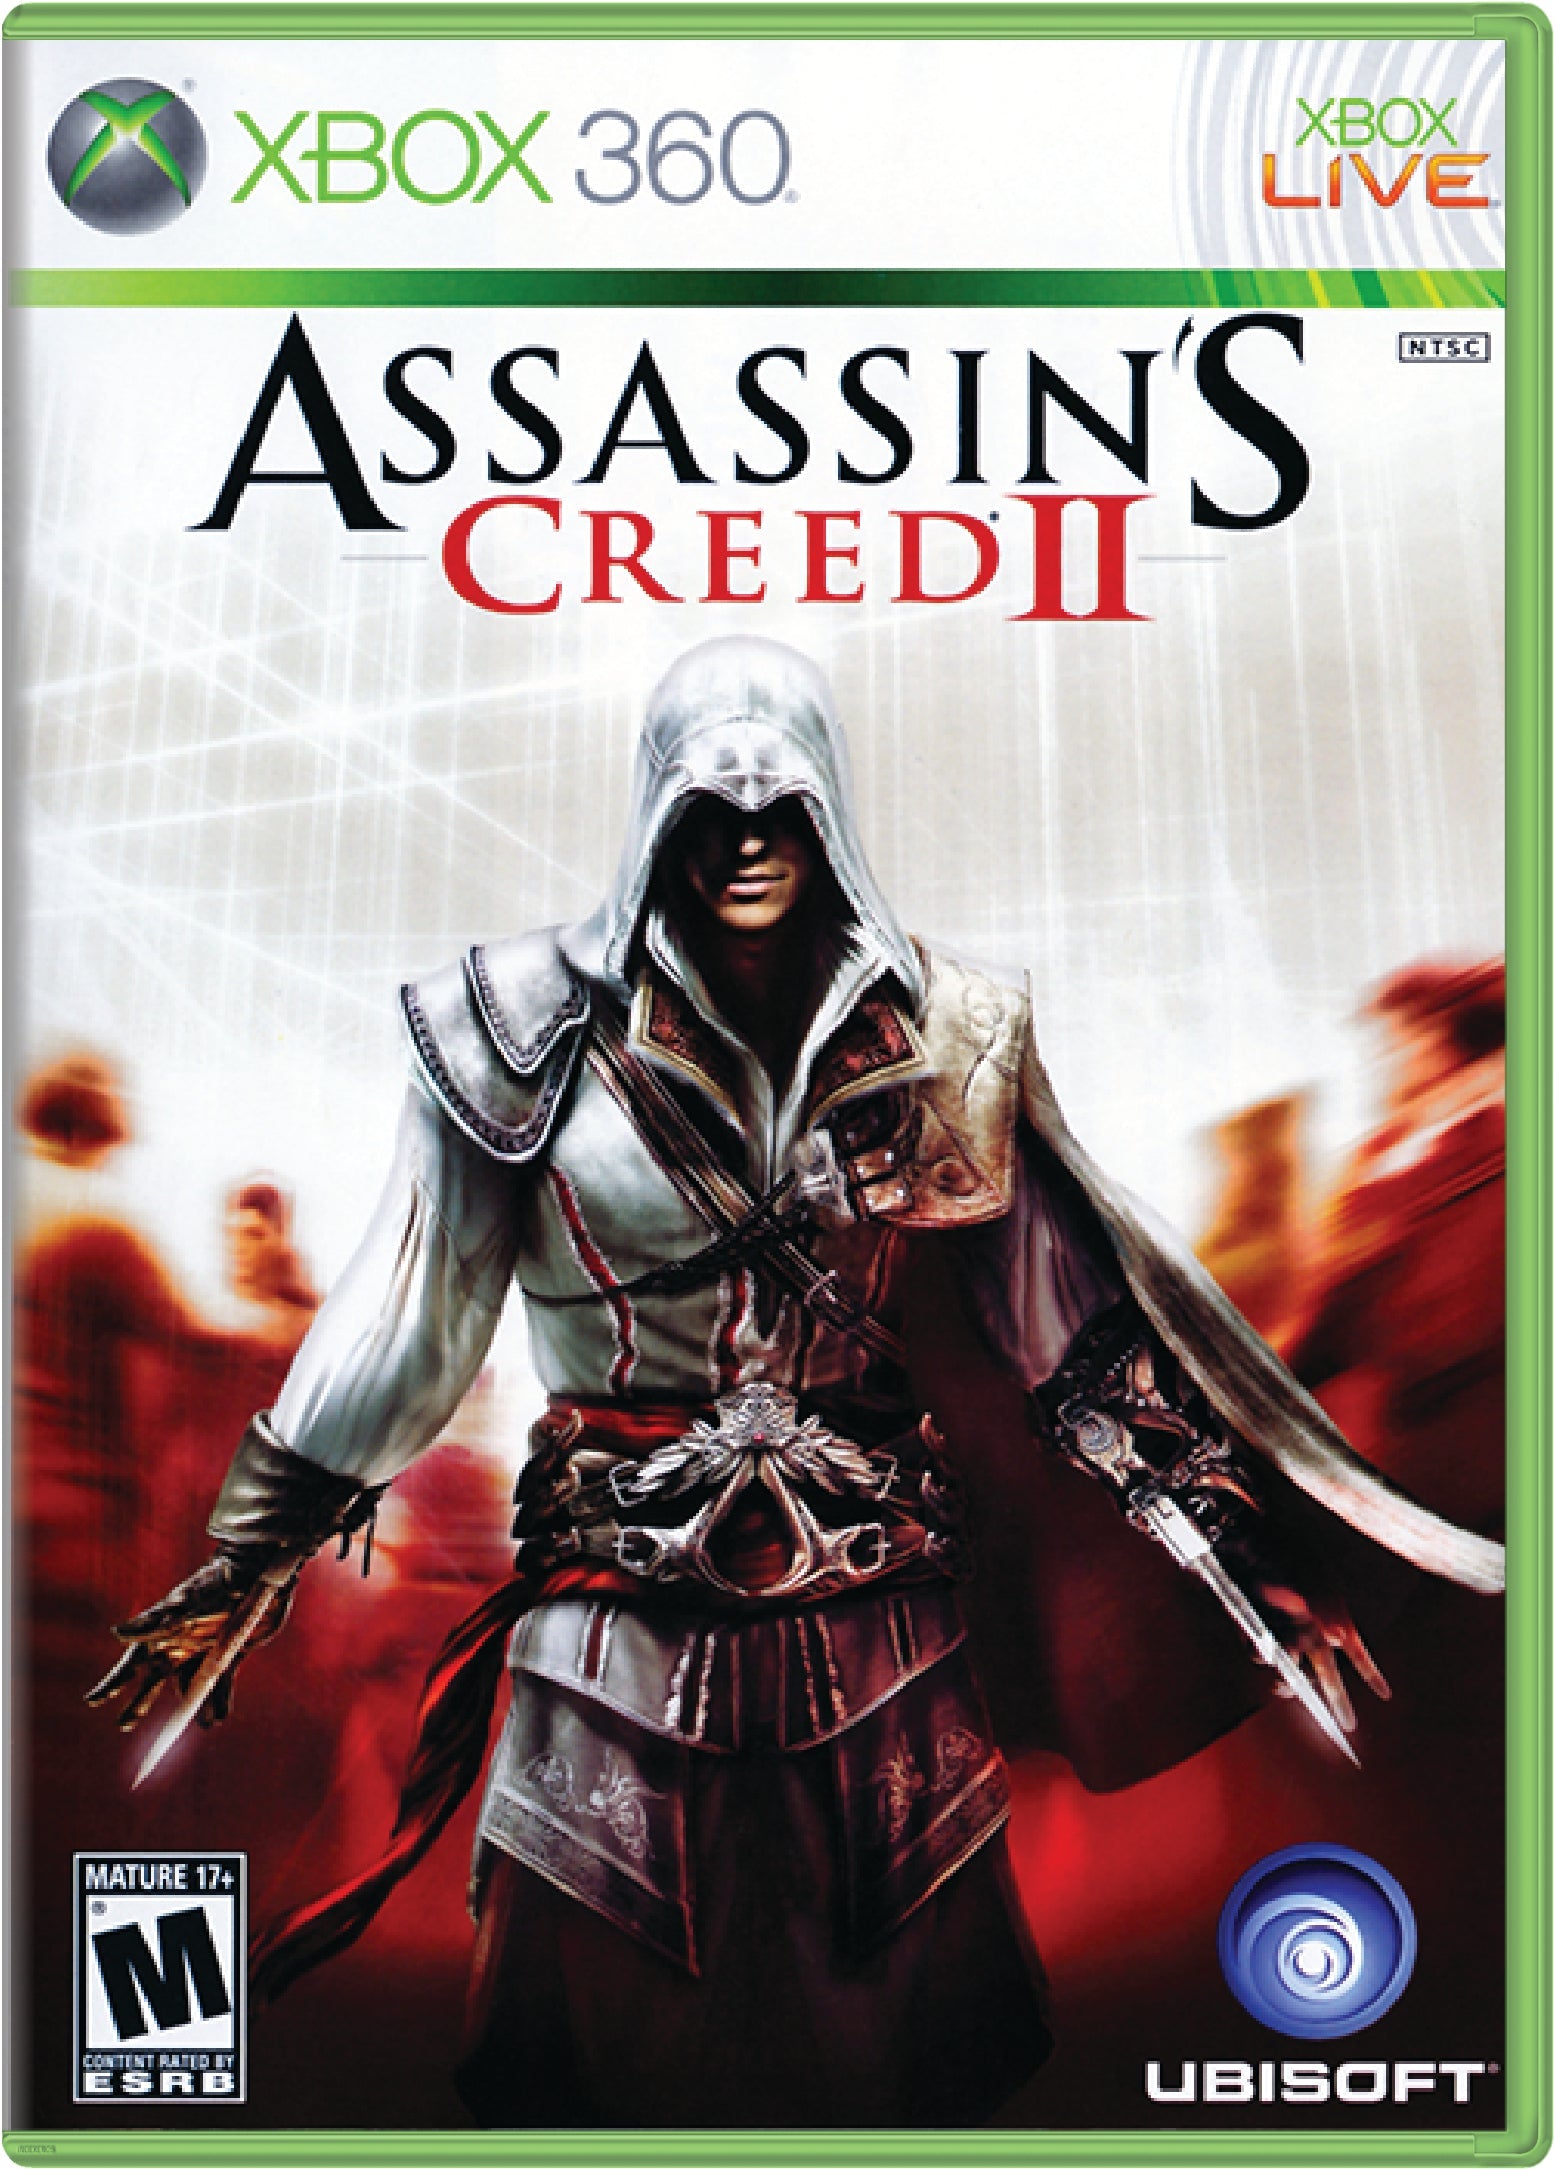 Assassin's Creed II Cover Art